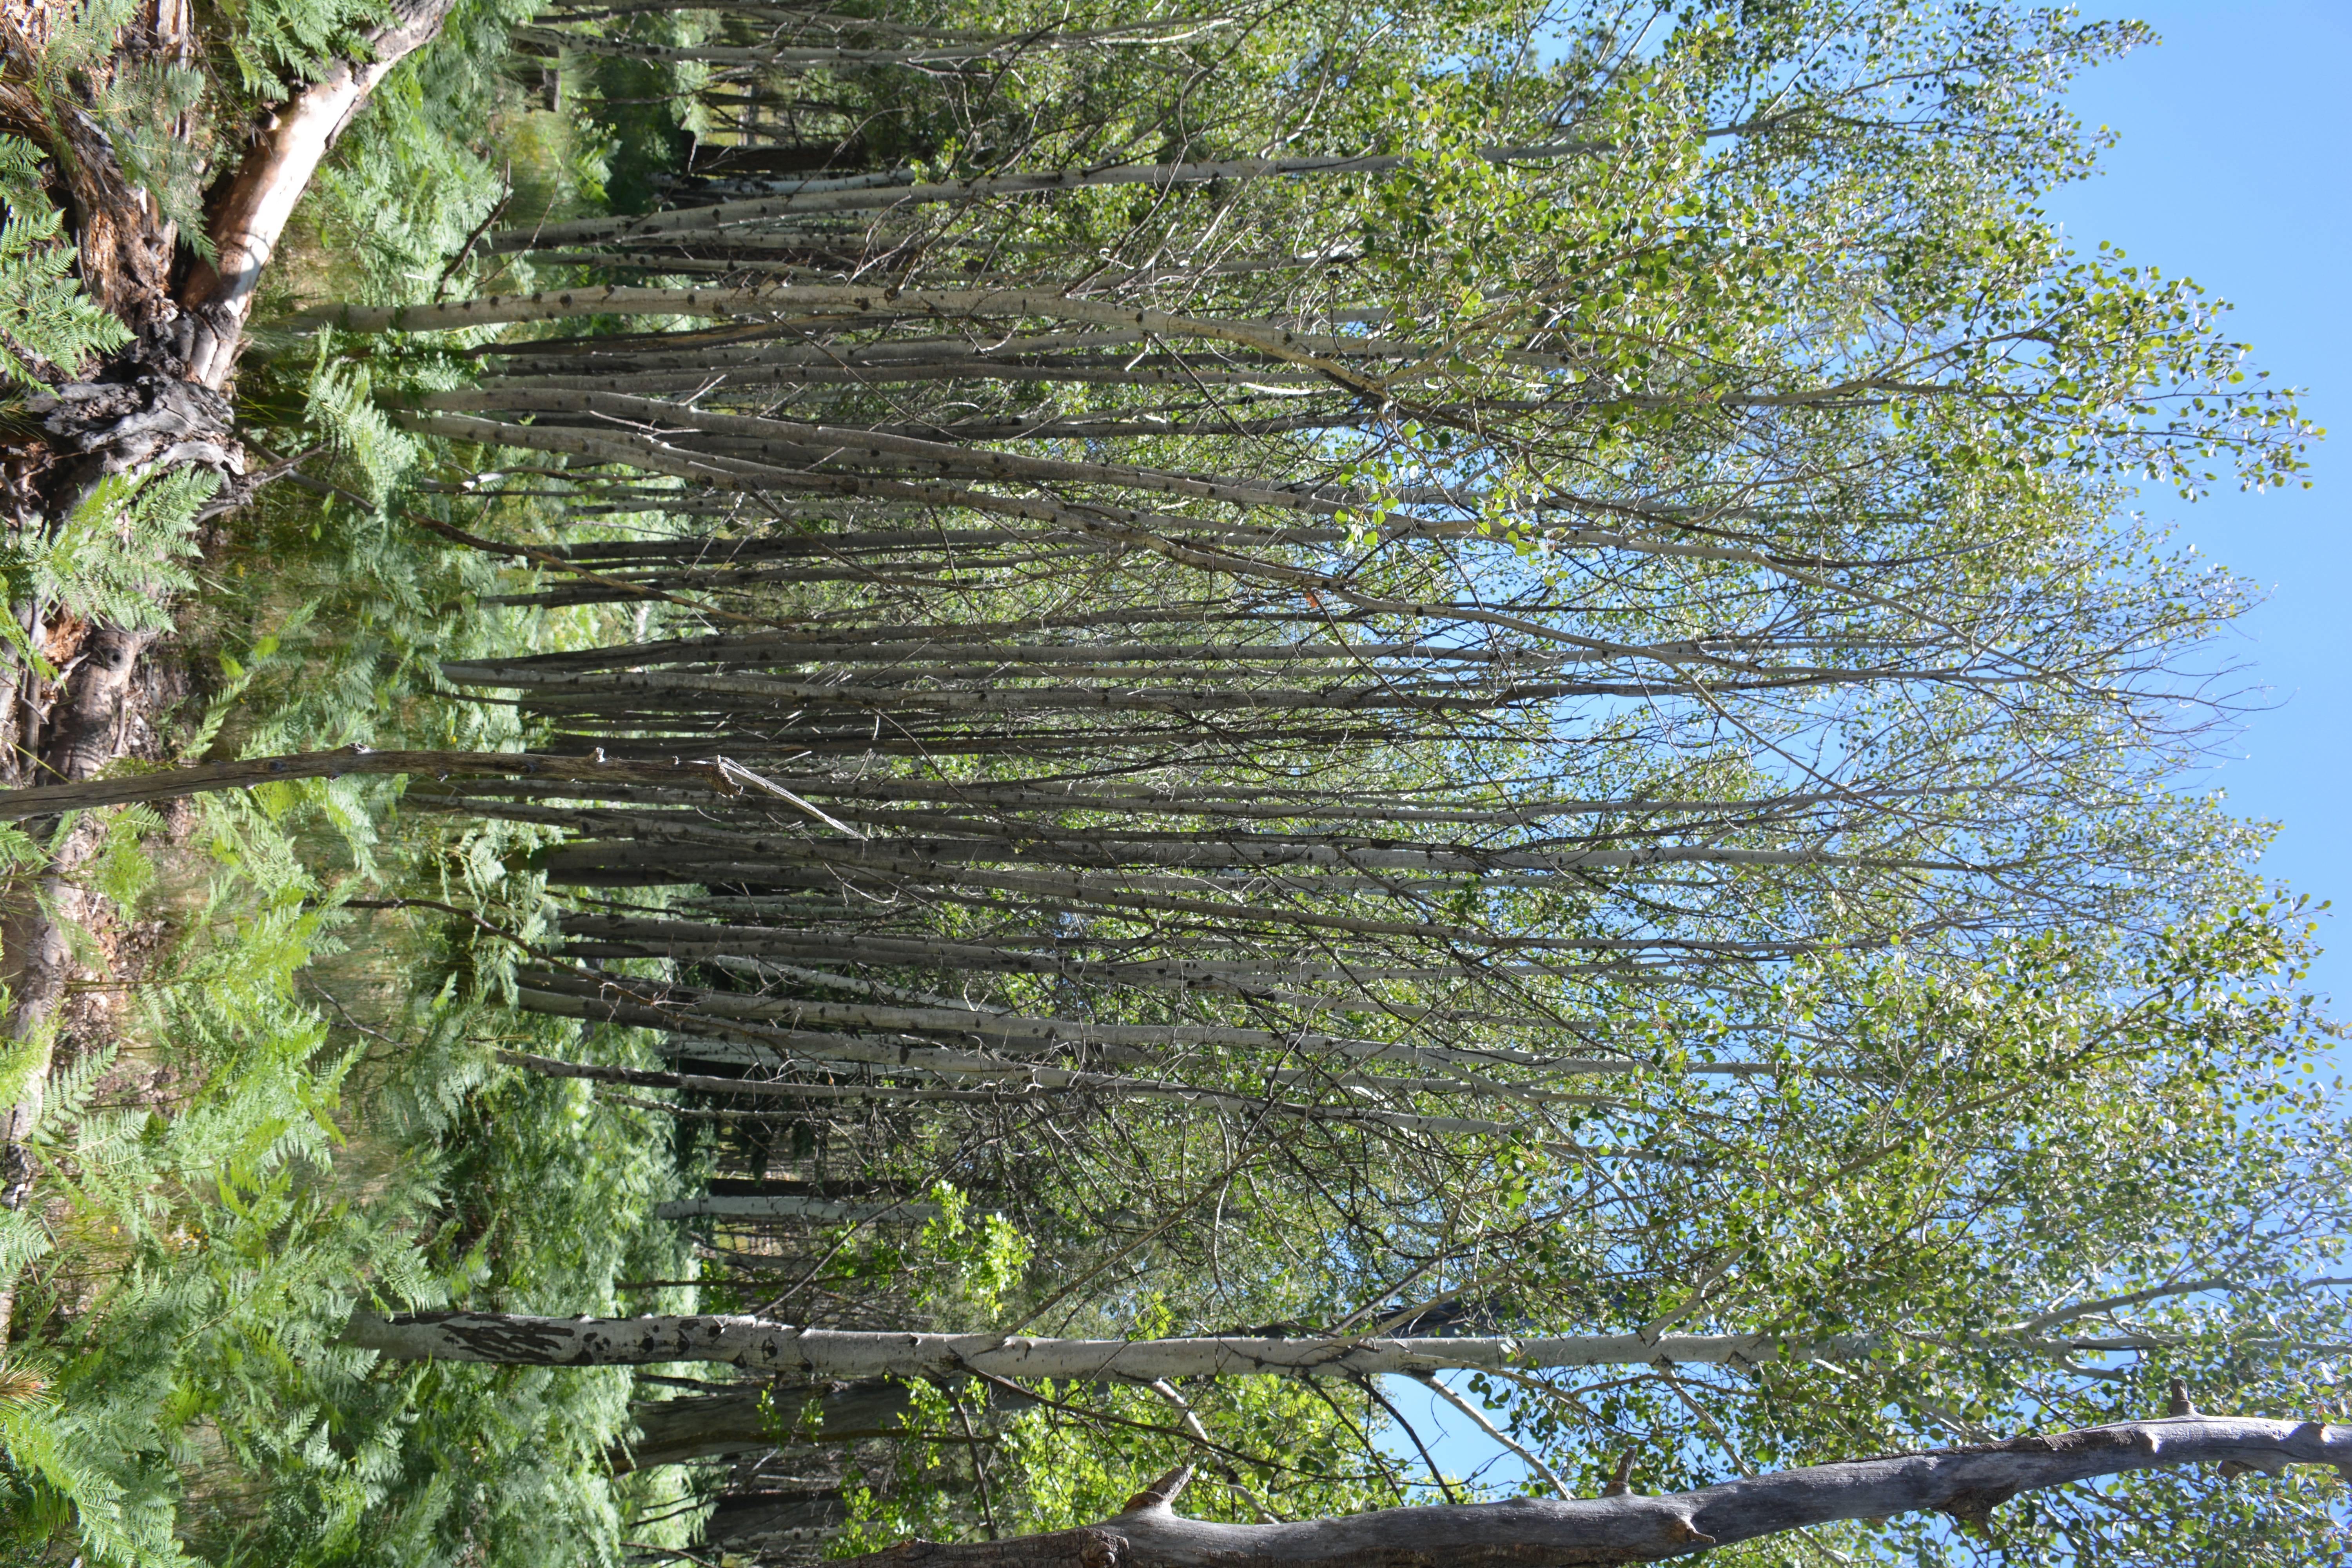 Dark patches of severe oystershell scale infestations on aspen stems